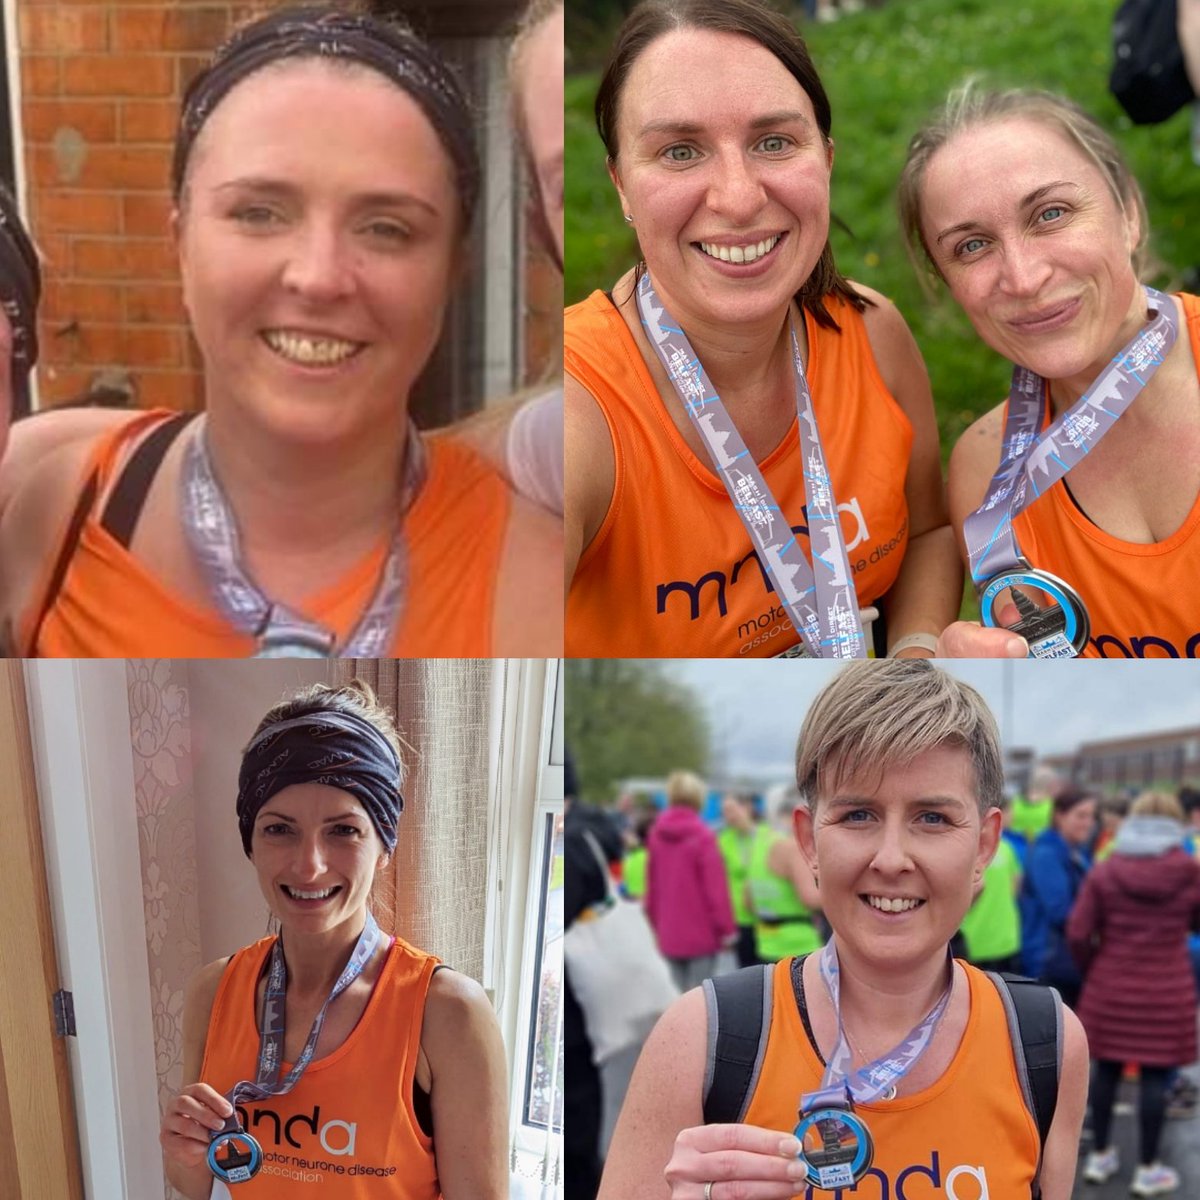 Throwback to last Sunday's #Belfastmarathon when 5 members of #CoMCTeamEmerald ran the relays with their obstetric and midwifery colleagues to raise money for MND. A truly fantastic amount was raised 🙌 it was a FANTASTIC effort from everyone. #teamSHSCT